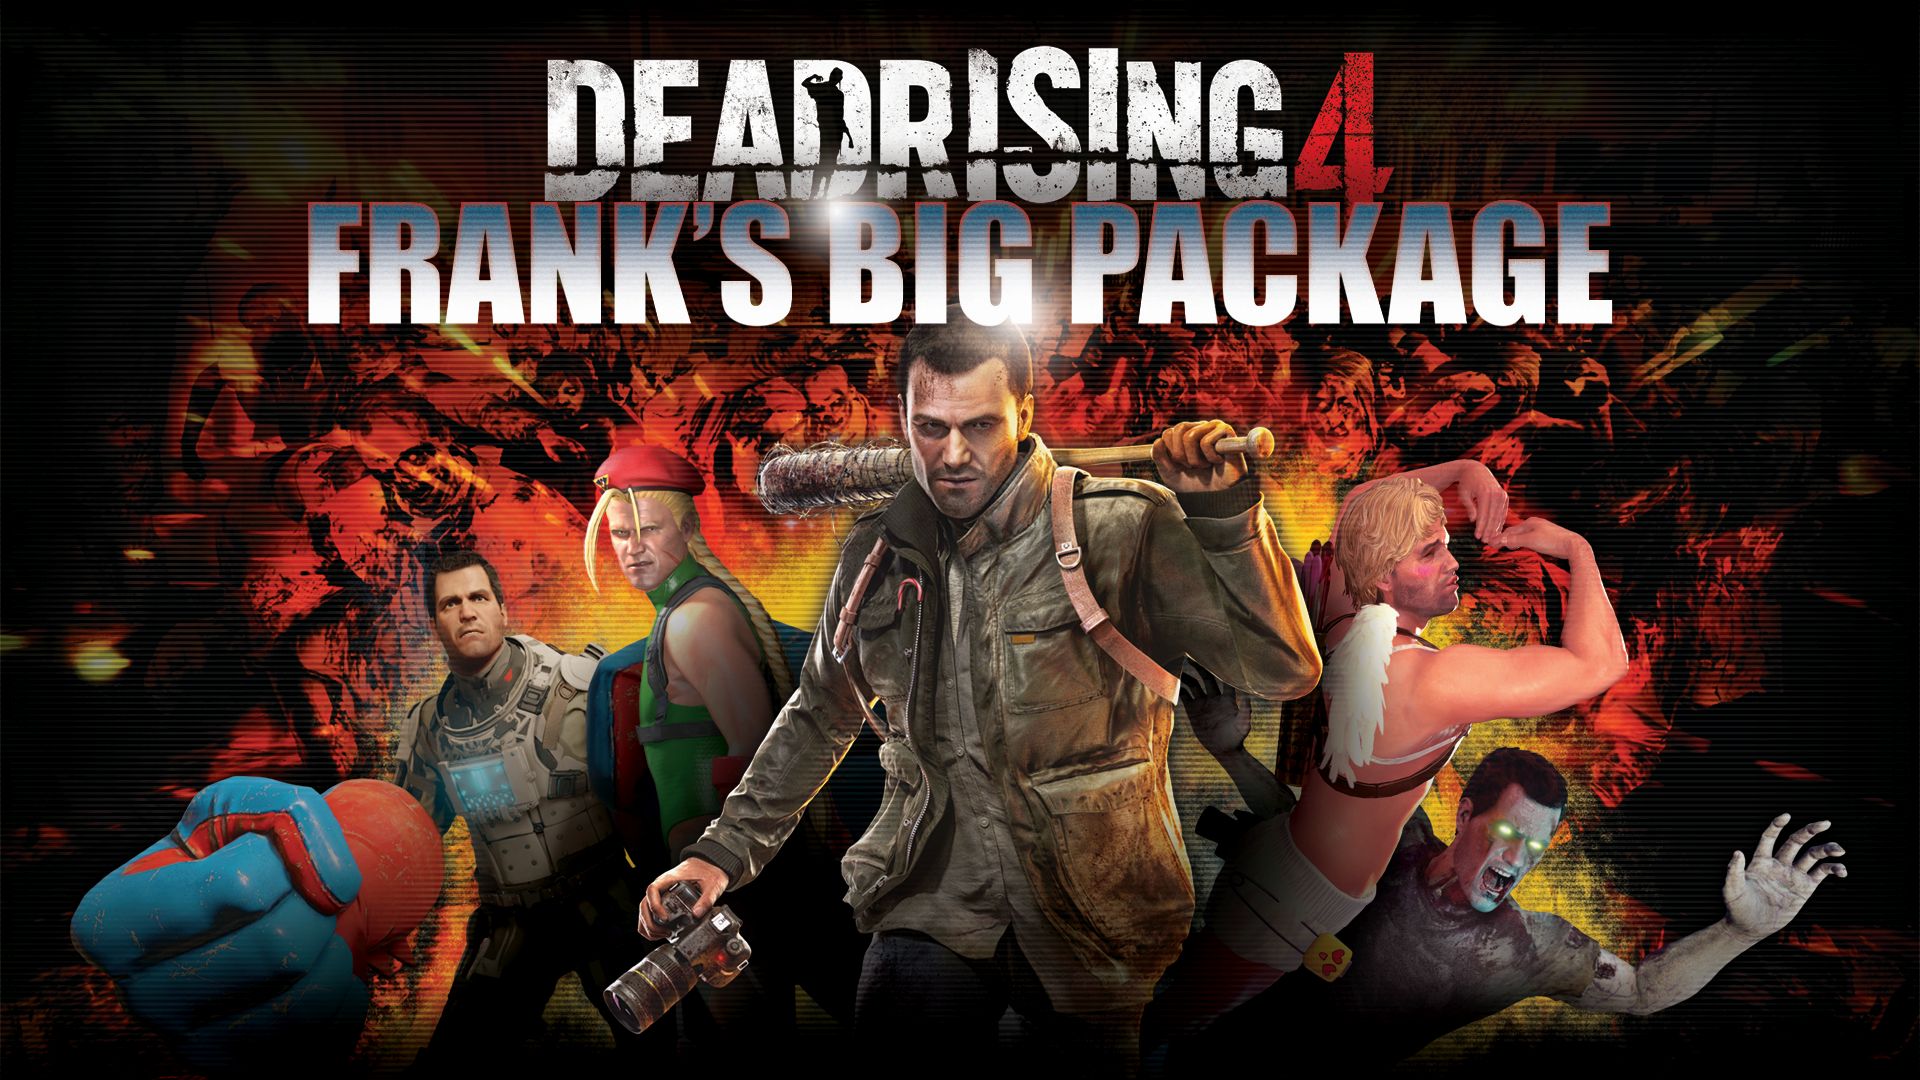 Dead Rising 4: Frank’s Big Package Heads to PS4 on December 5